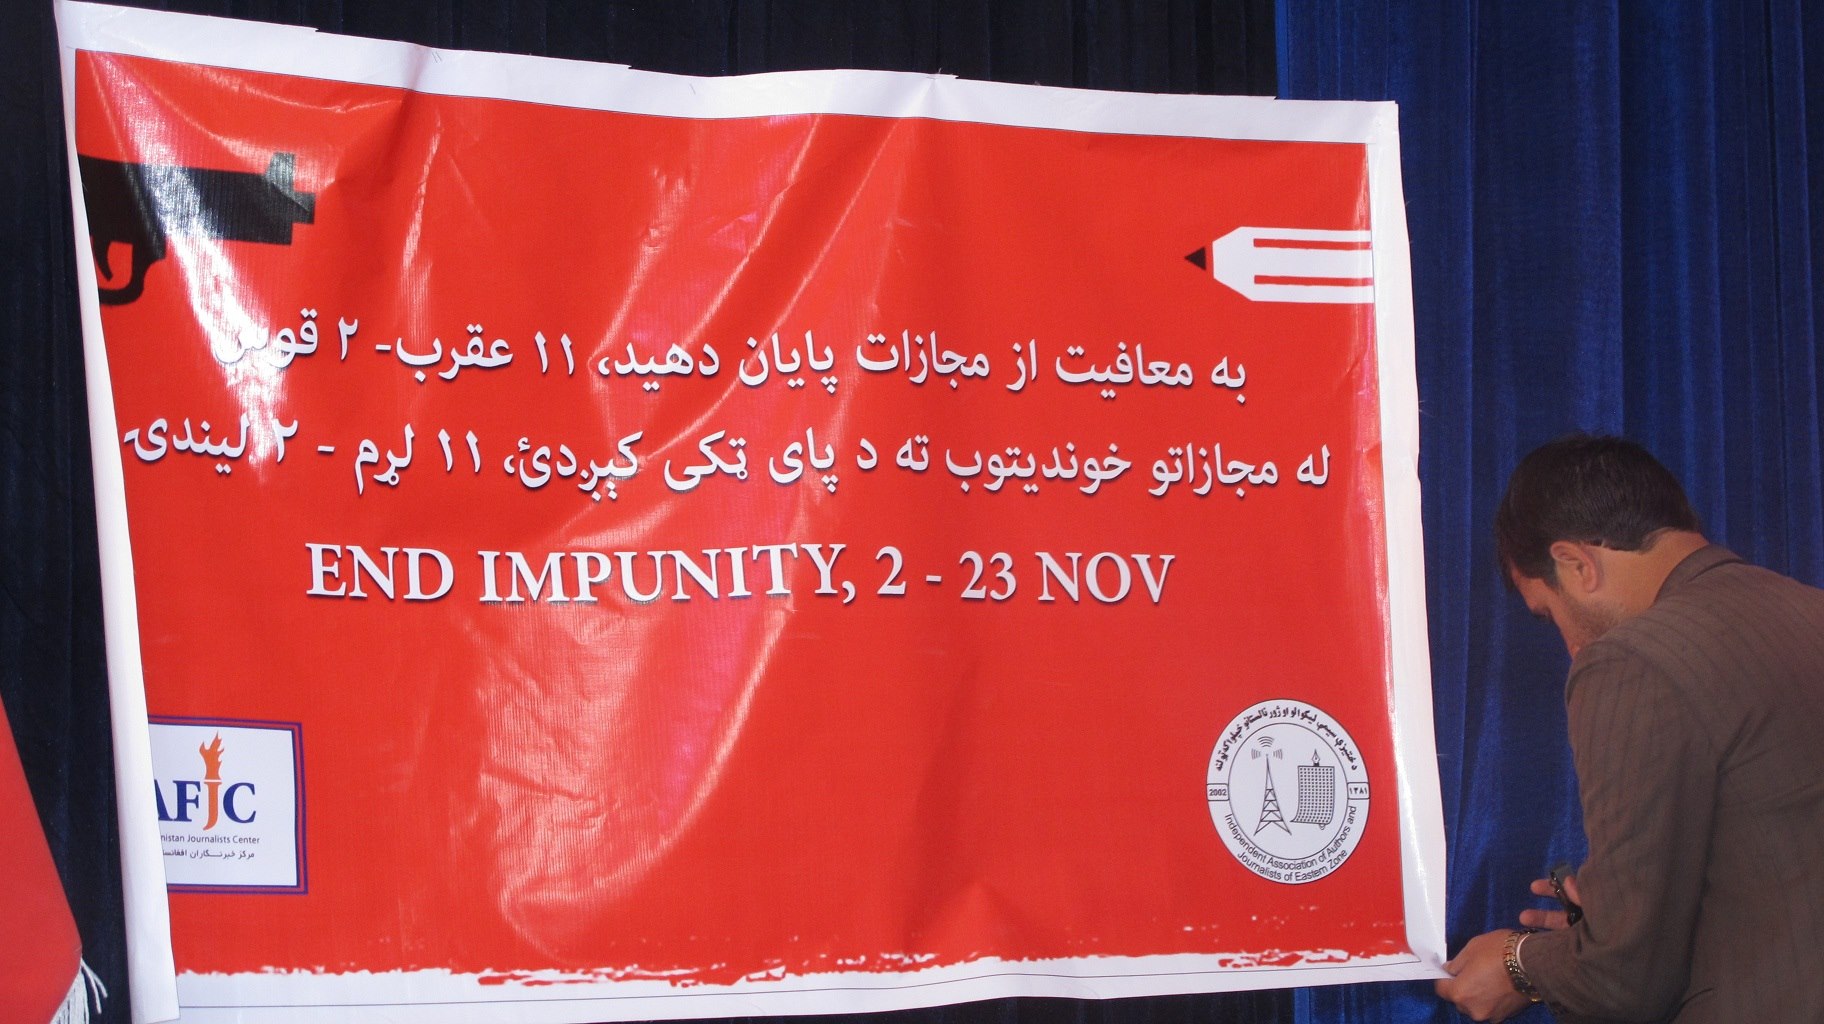 AFJC campaign against impunity, 2-23 November 2014